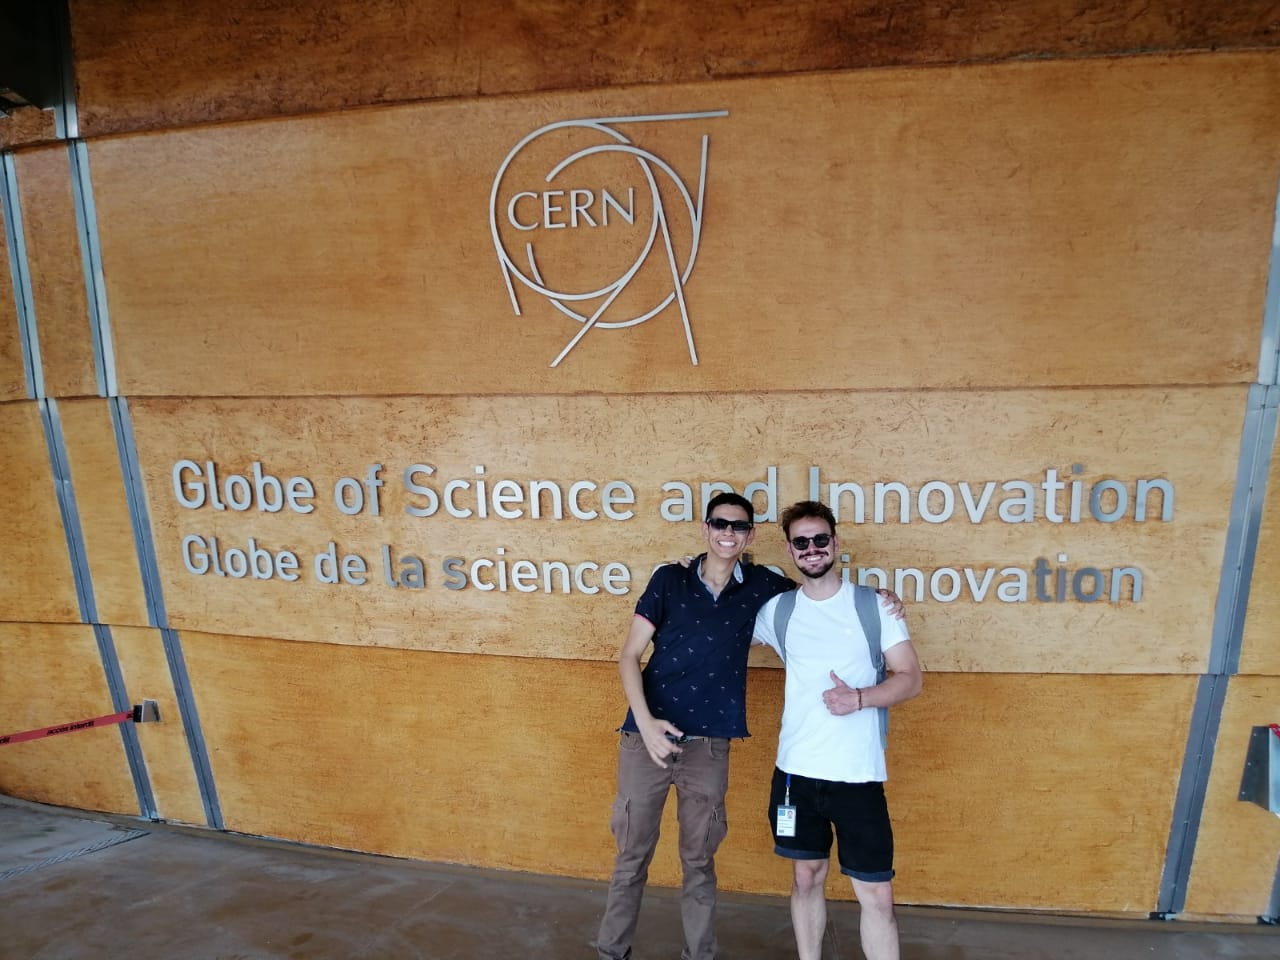 Filip and Jose in front of the Globe